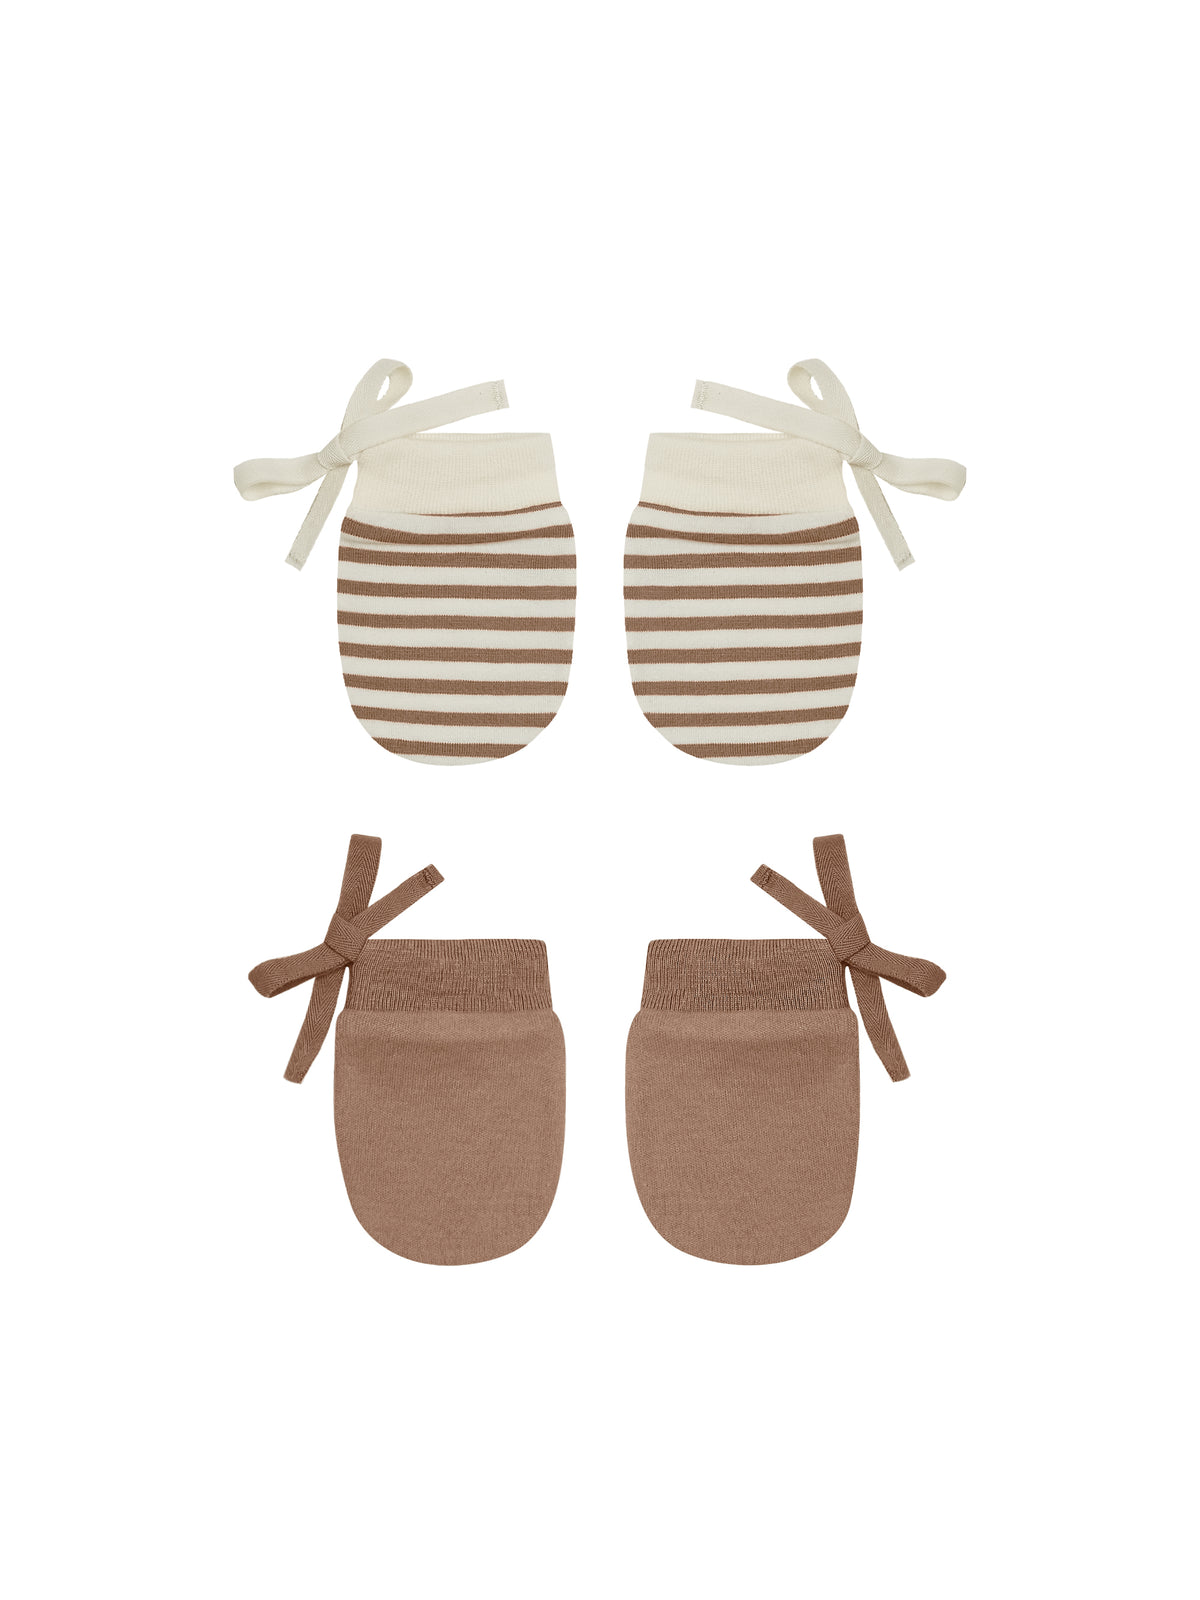 Quincy Mae | No Scratch Mittens Set Cocoa Stripe & Ivory